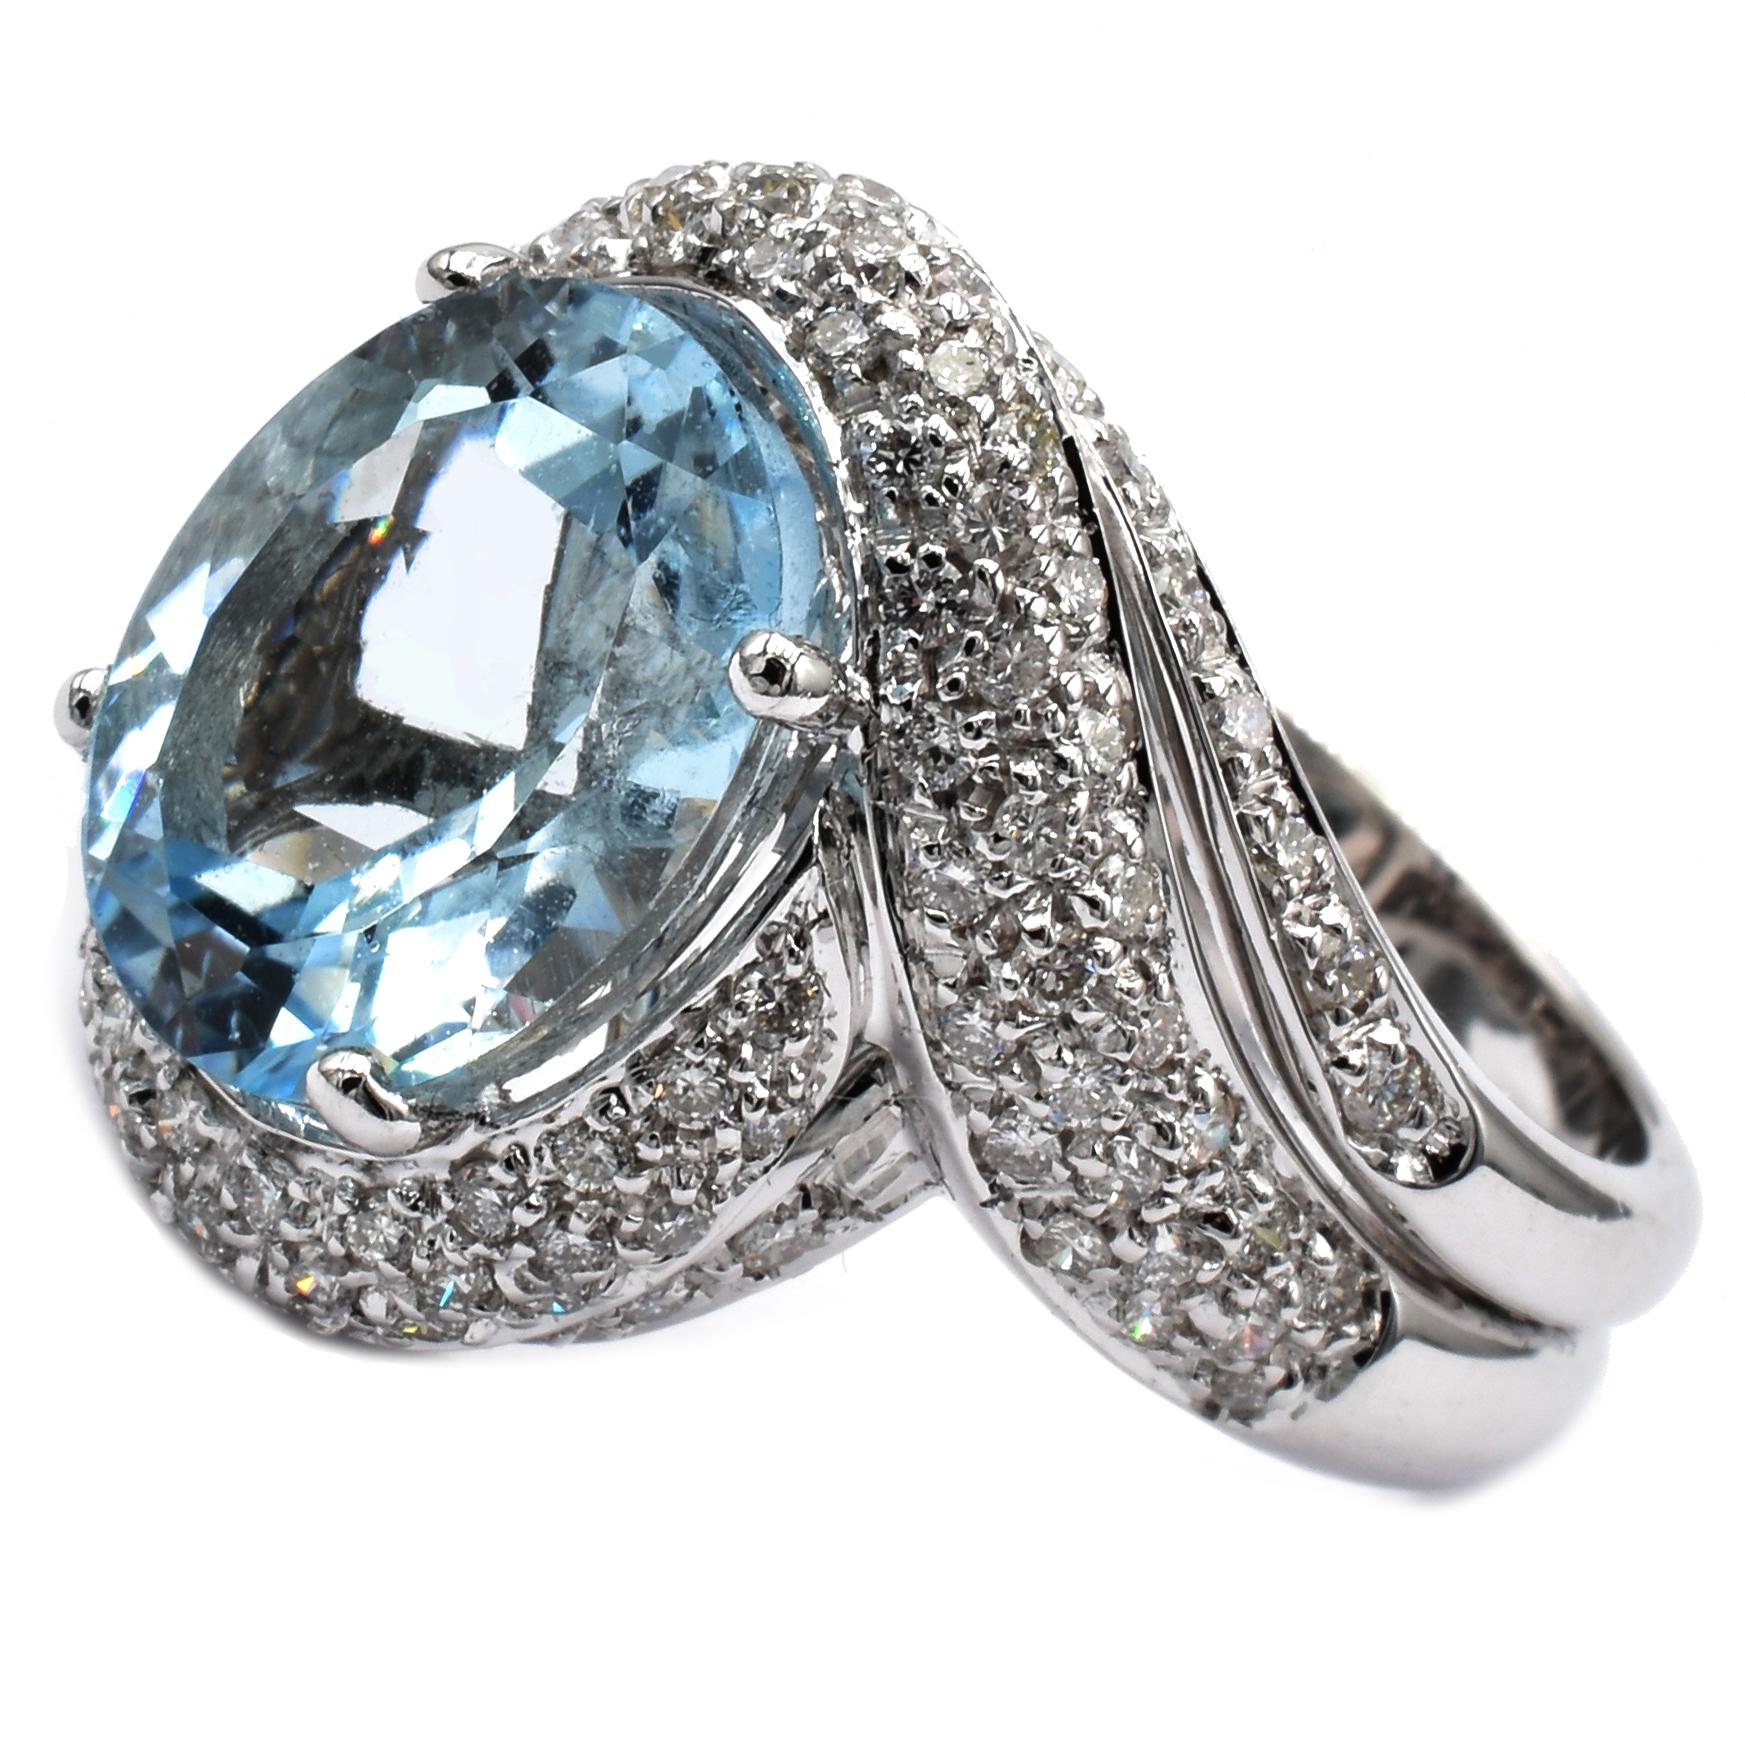 Contemporary Gilberto Cassola Oval Shaped Aquamarine and Diamonds Gold Ring Made in Italy For Sale